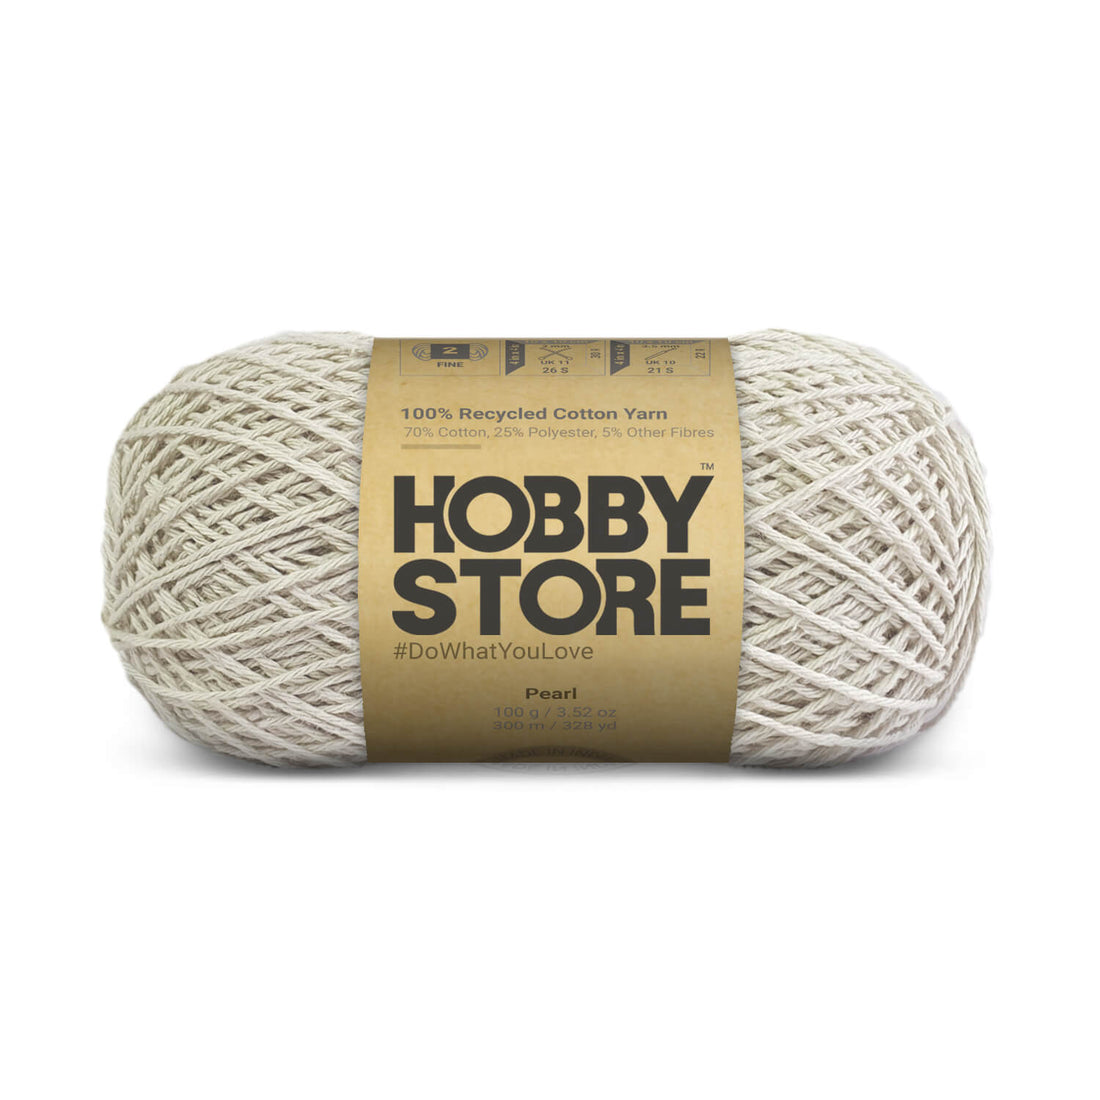 Recycled Cotton Yarn by Hobby Store - Pearl 8311